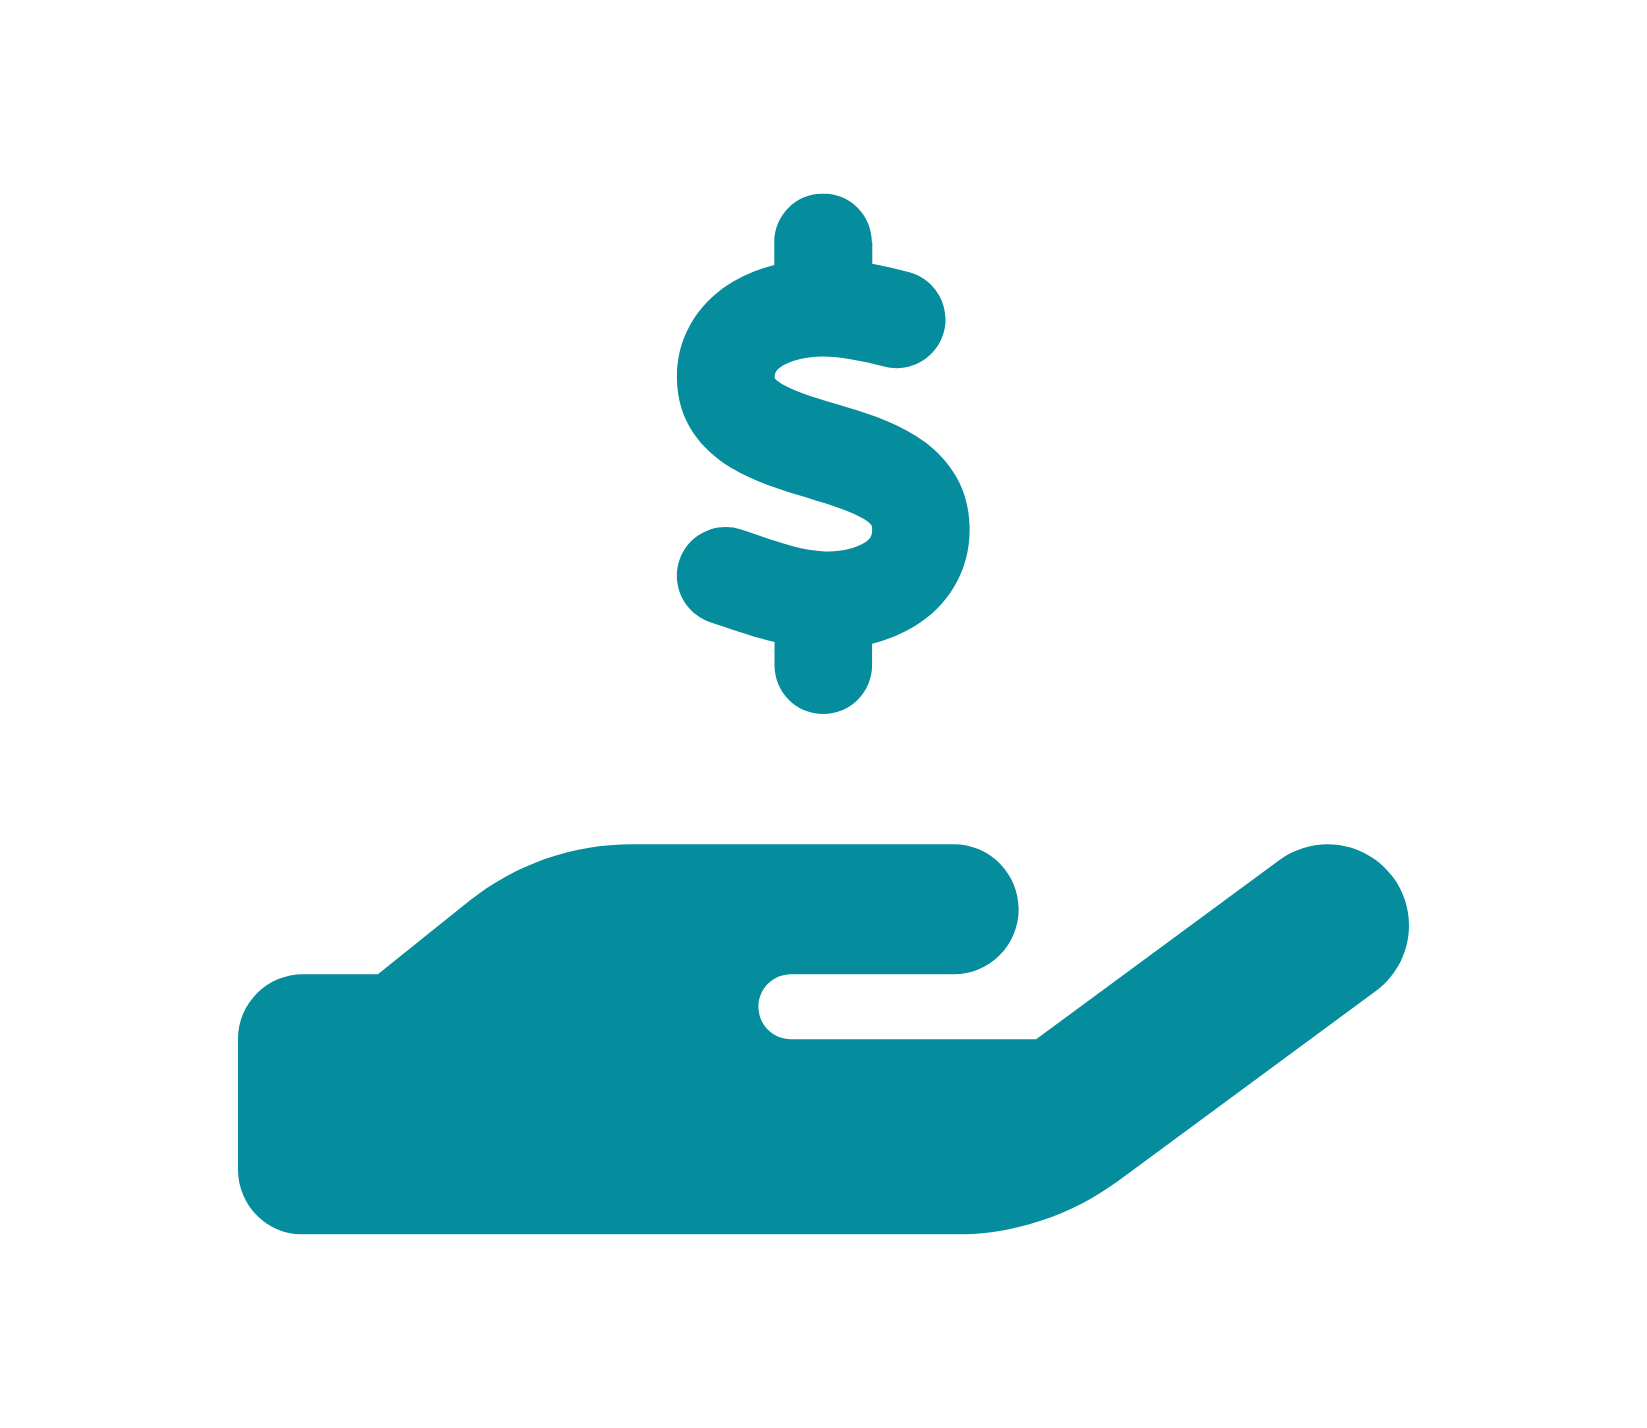 Hand with dollar sign icon